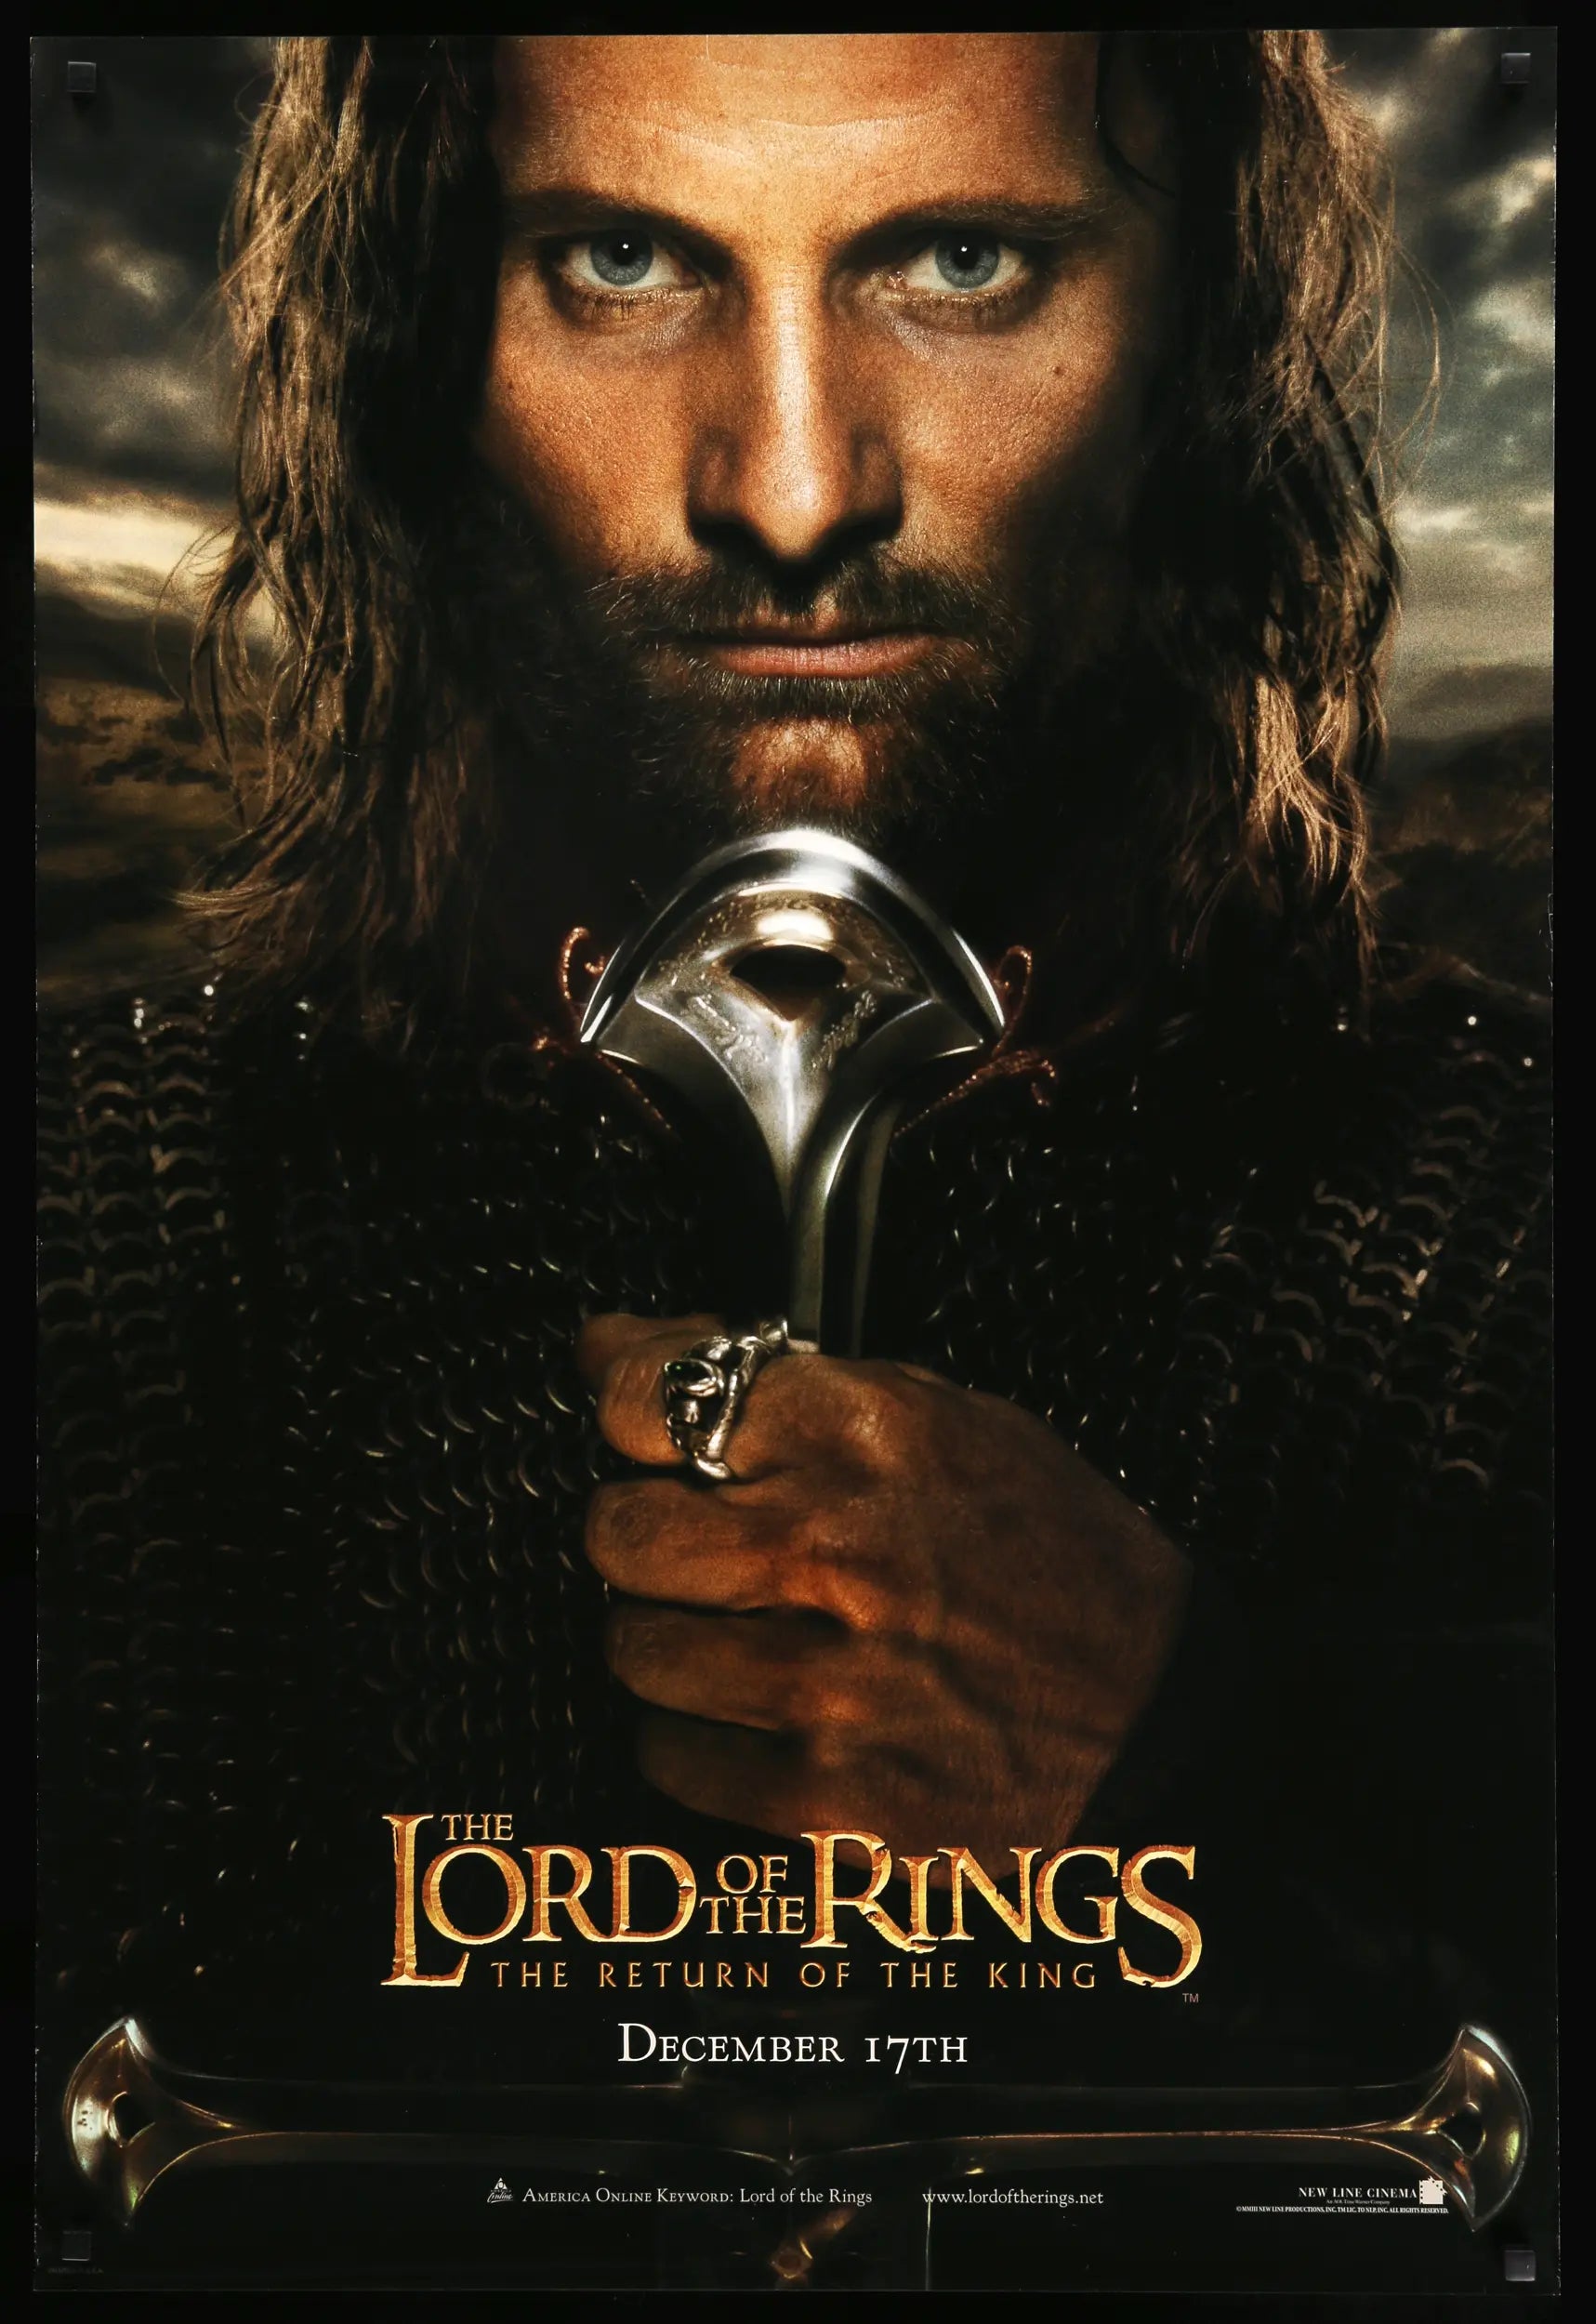 The Lord of the Rings-The Two Towers (2002) French Grande Movie Poster -  Original Film Art - Vintage Movie Posters